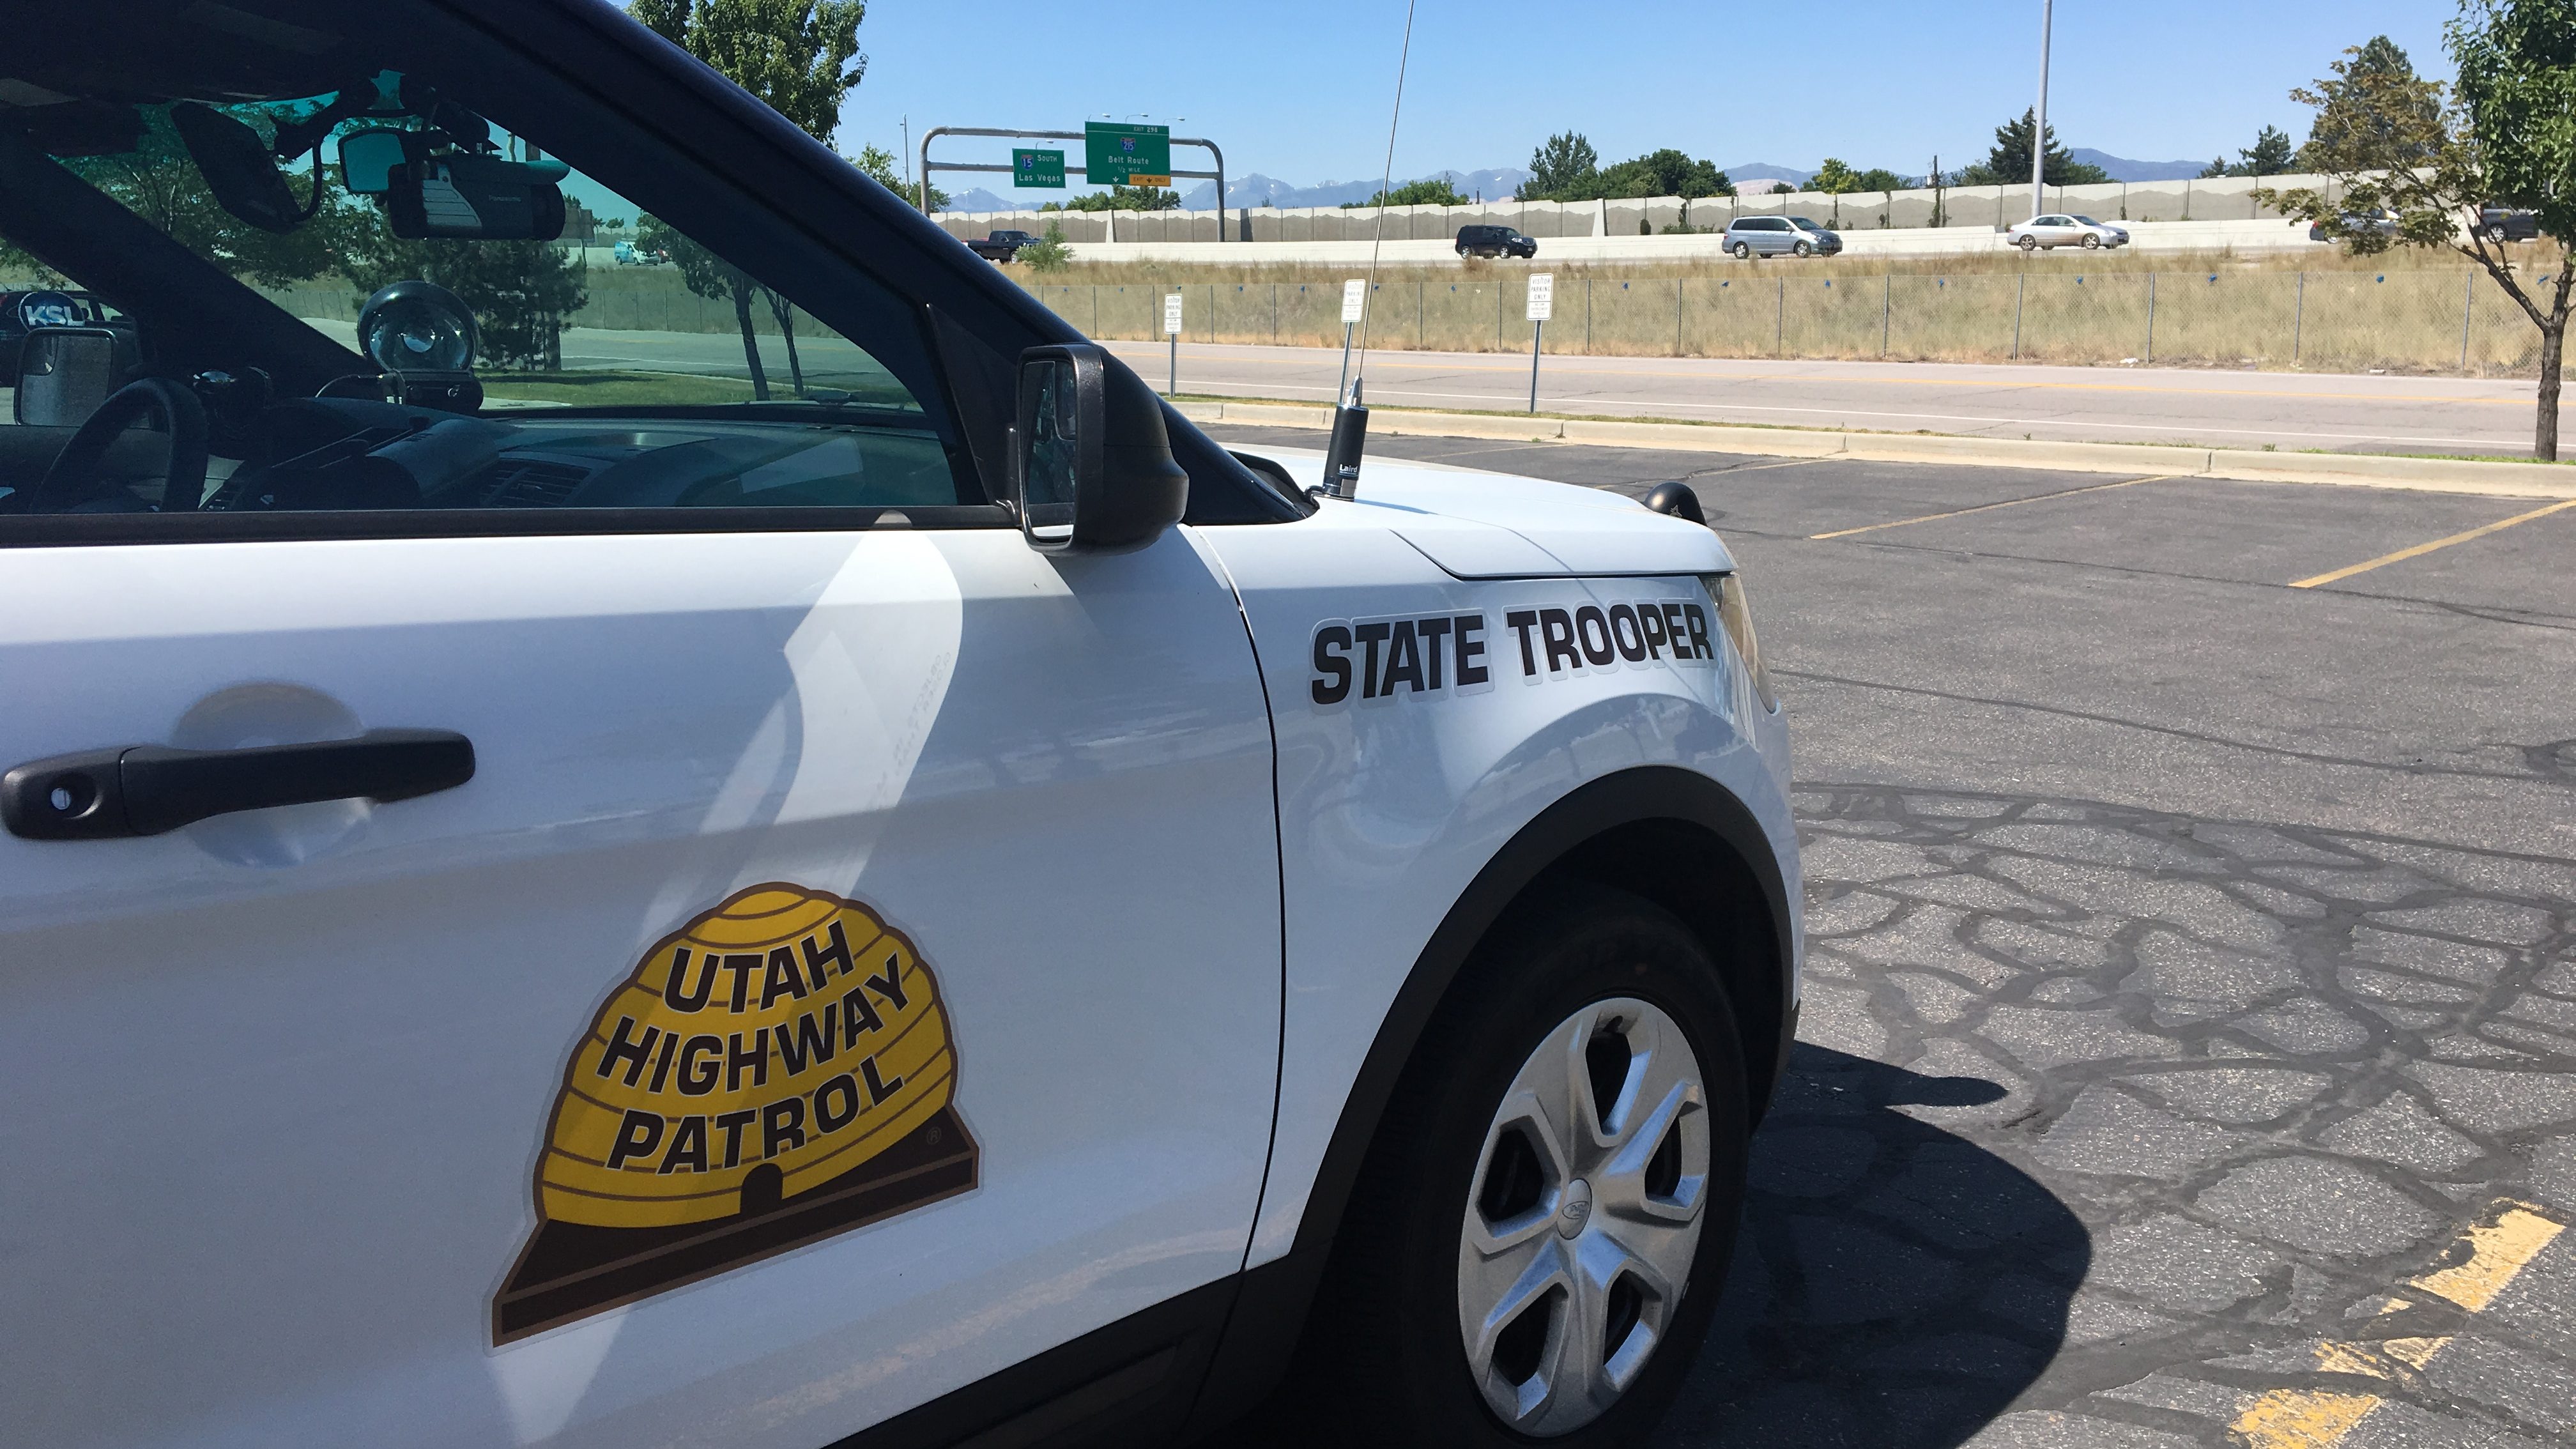 The Utah Highway Patrol says 65 motorists were stopped for DUI during the Halloween weekend (Oct. 2...